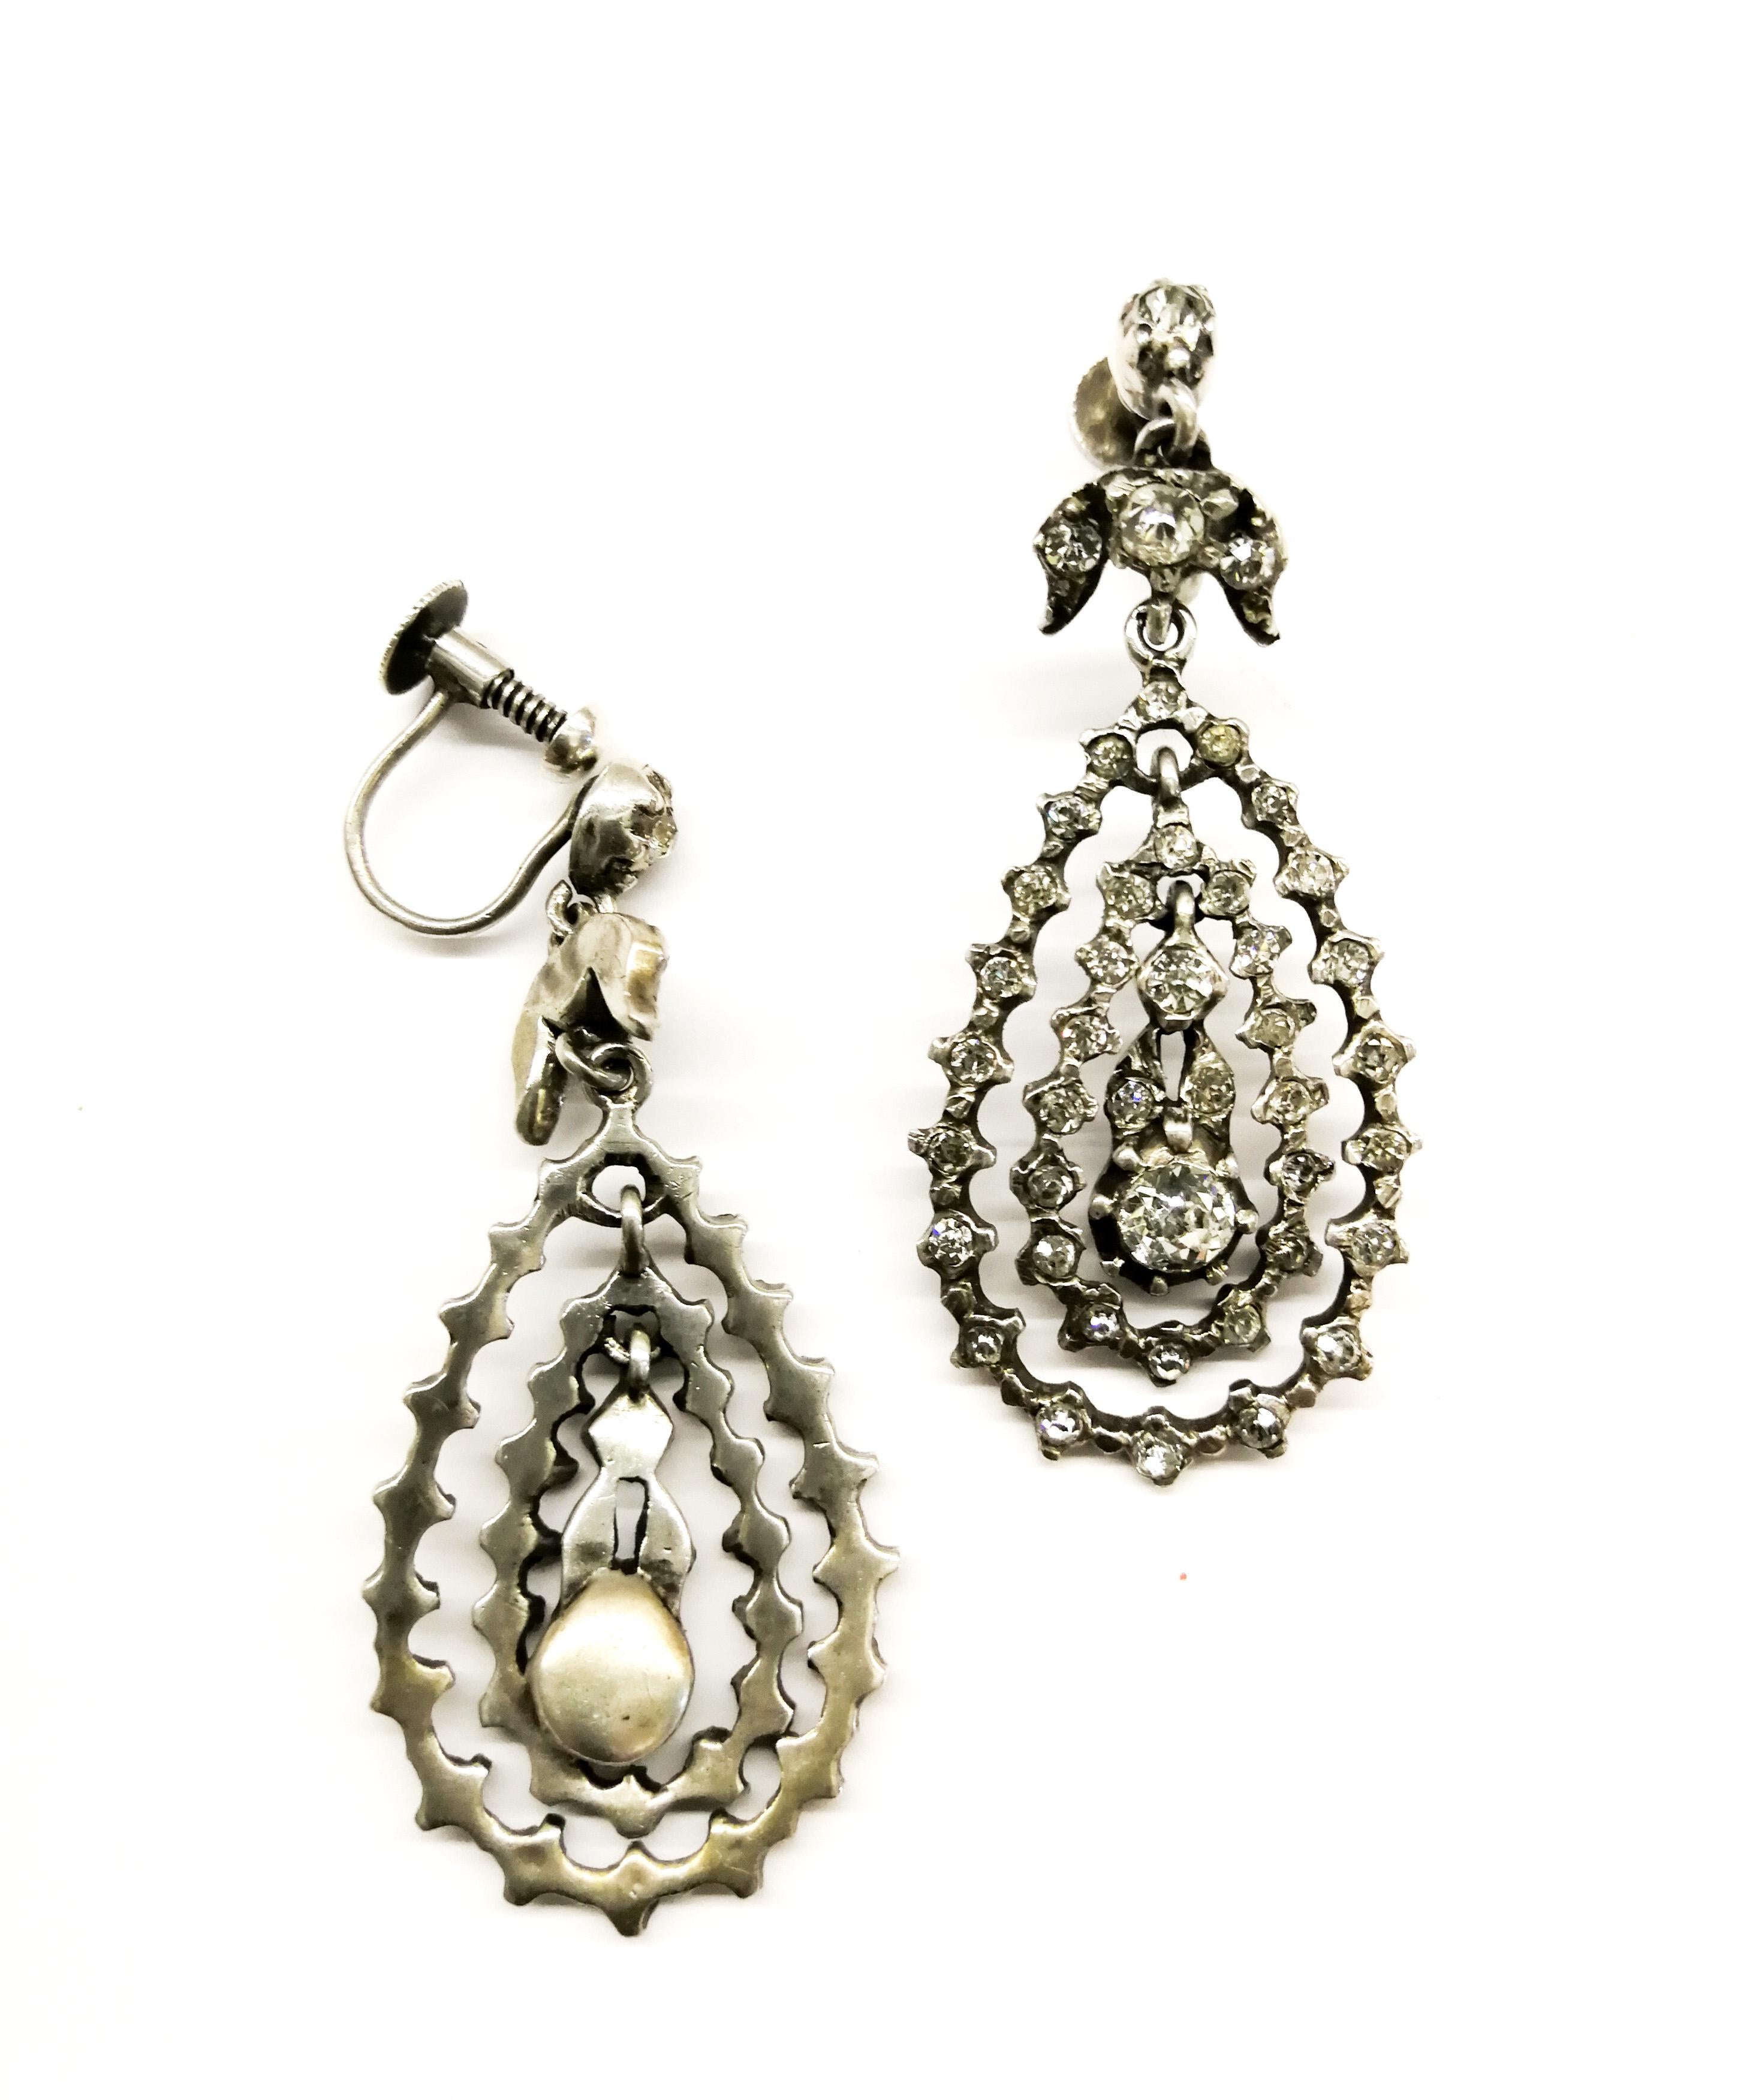 A very pretty pair of silver paste drop earrings, from the Edwardian era, with hand set stones in silver.  Each earring is made from three suspended parts, two 'hoops' and a small central pendant, catching the light and eye as they gently move and